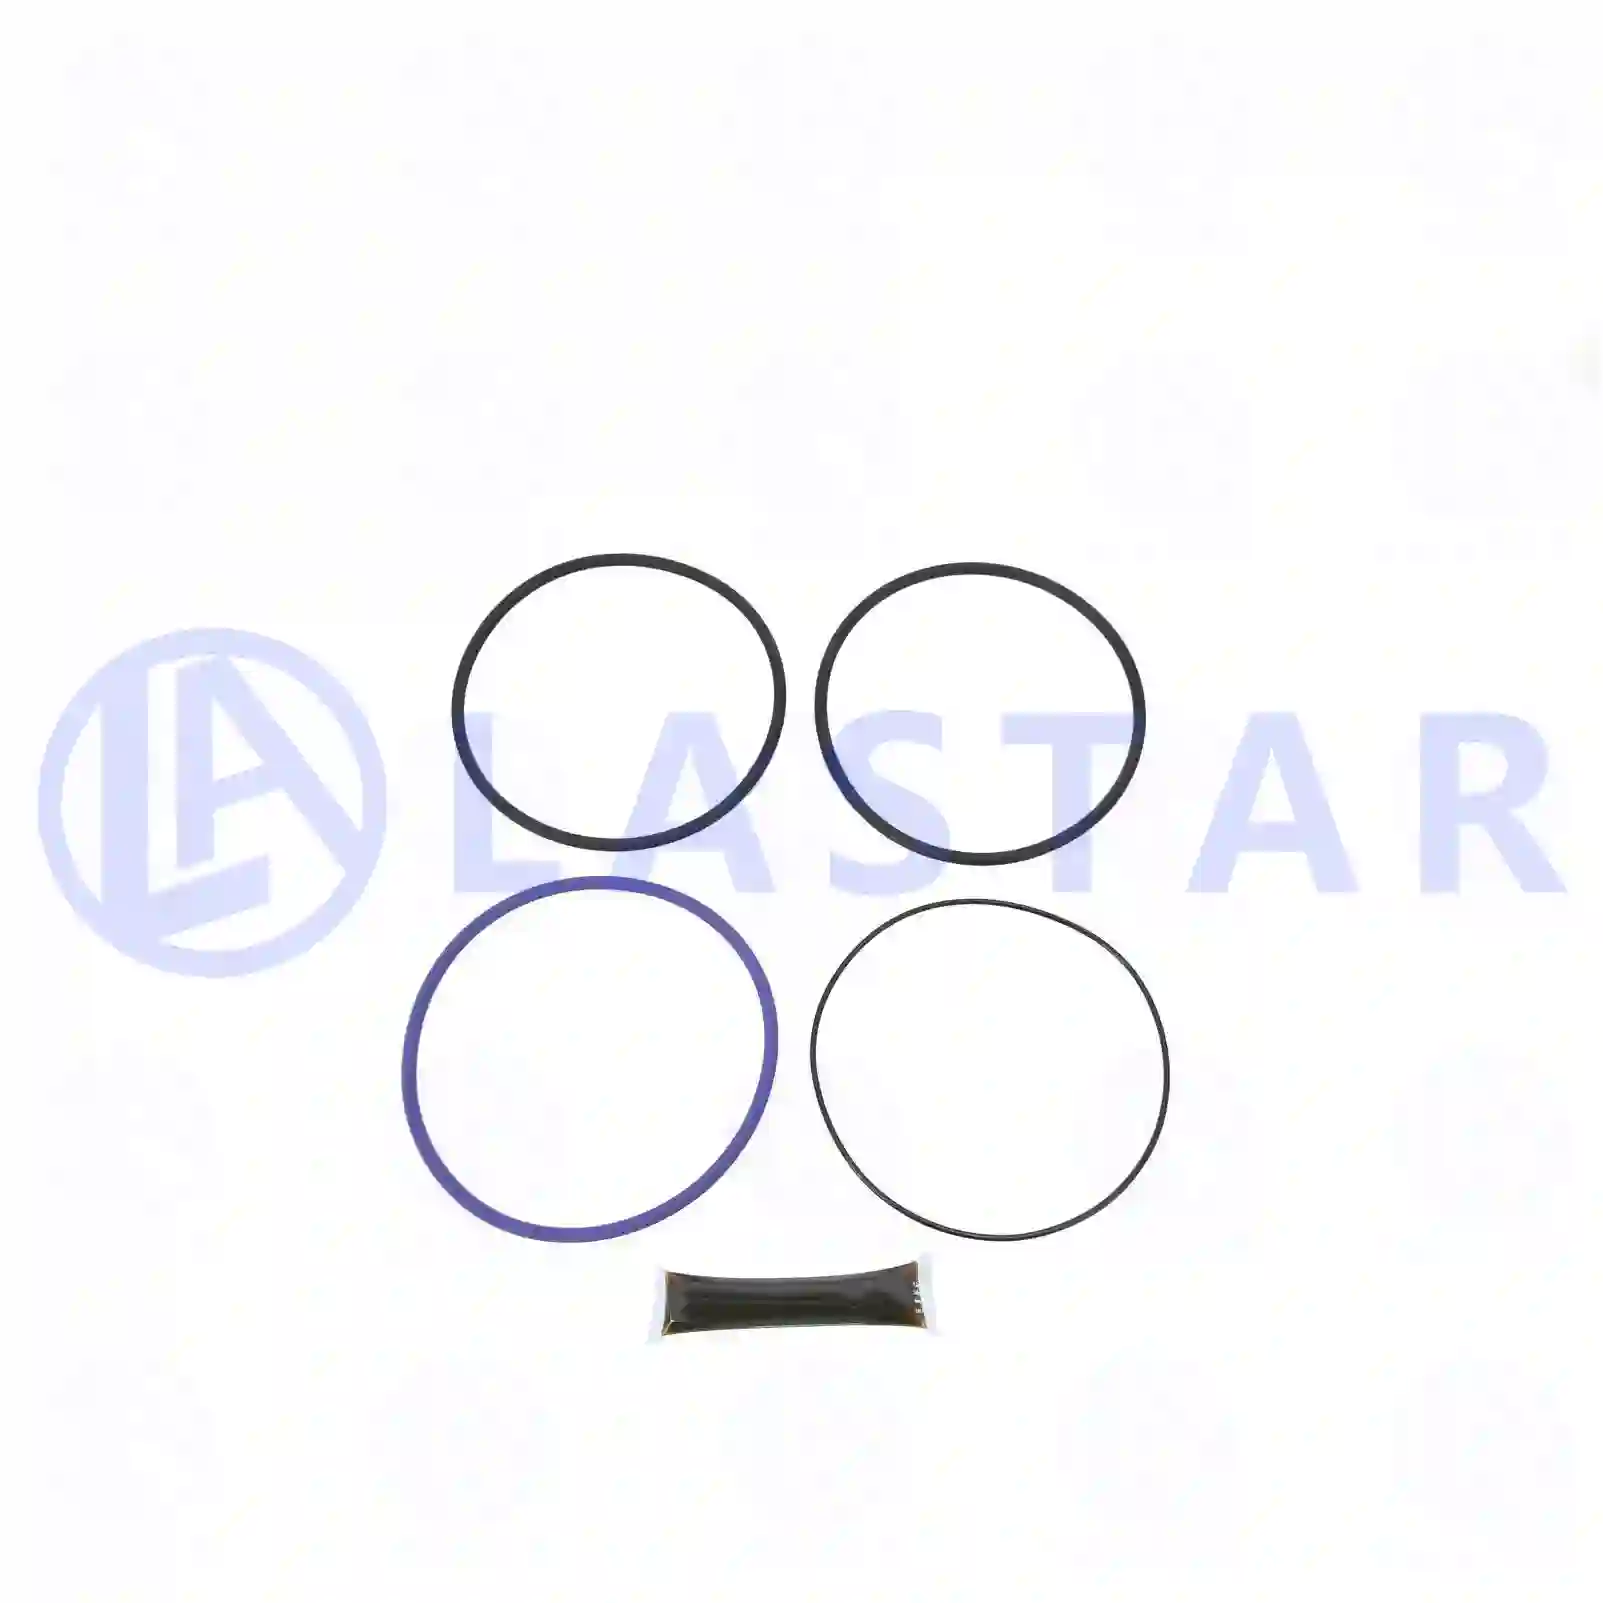 Seal ring kit, cylinder liner, 77703621, 7400270950, 270950, 271121, ZG02072-0008 ||  77703621 Lastar Spare Part | Truck Spare Parts, Auotomotive Spare Parts Seal ring kit, cylinder liner, 77703621, 7400270950, 270950, 271121, ZG02072-0008 ||  77703621 Lastar Spare Part | Truck Spare Parts, Auotomotive Spare Parts